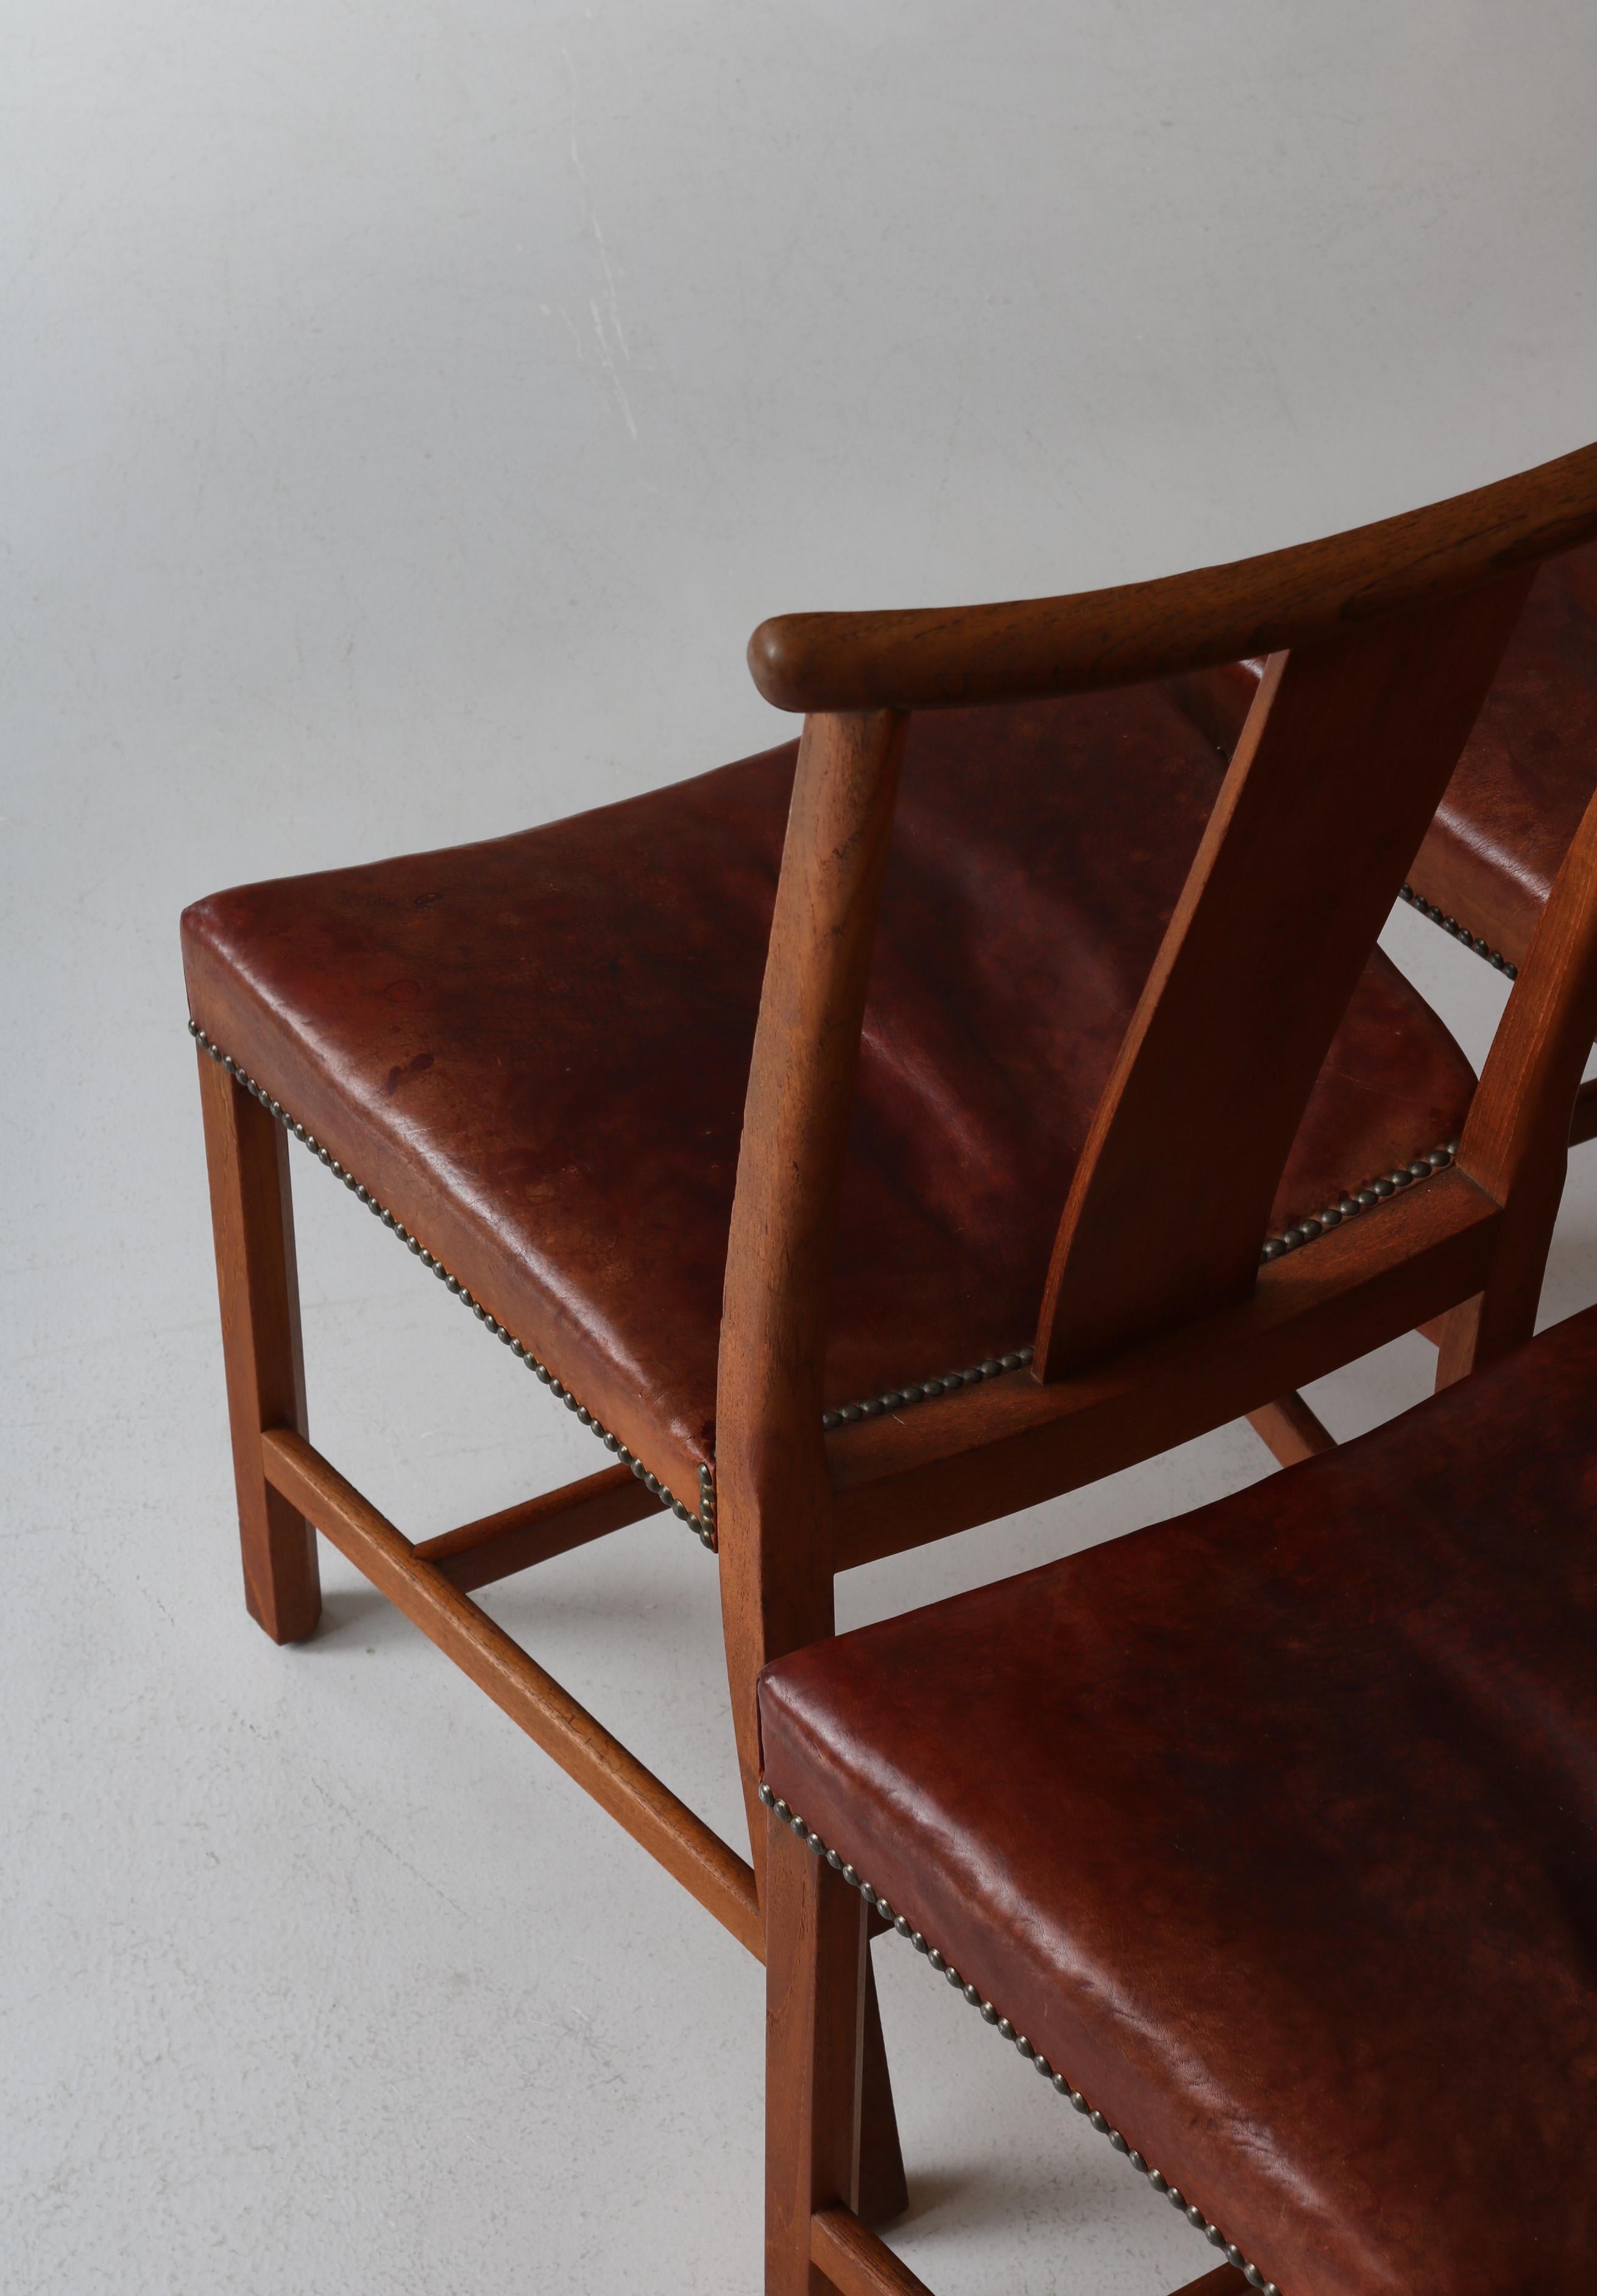 Set of Six Børge Mogensen Dining Chairs in Teak & Niger Leather, 1939, Denmark For Sale 3